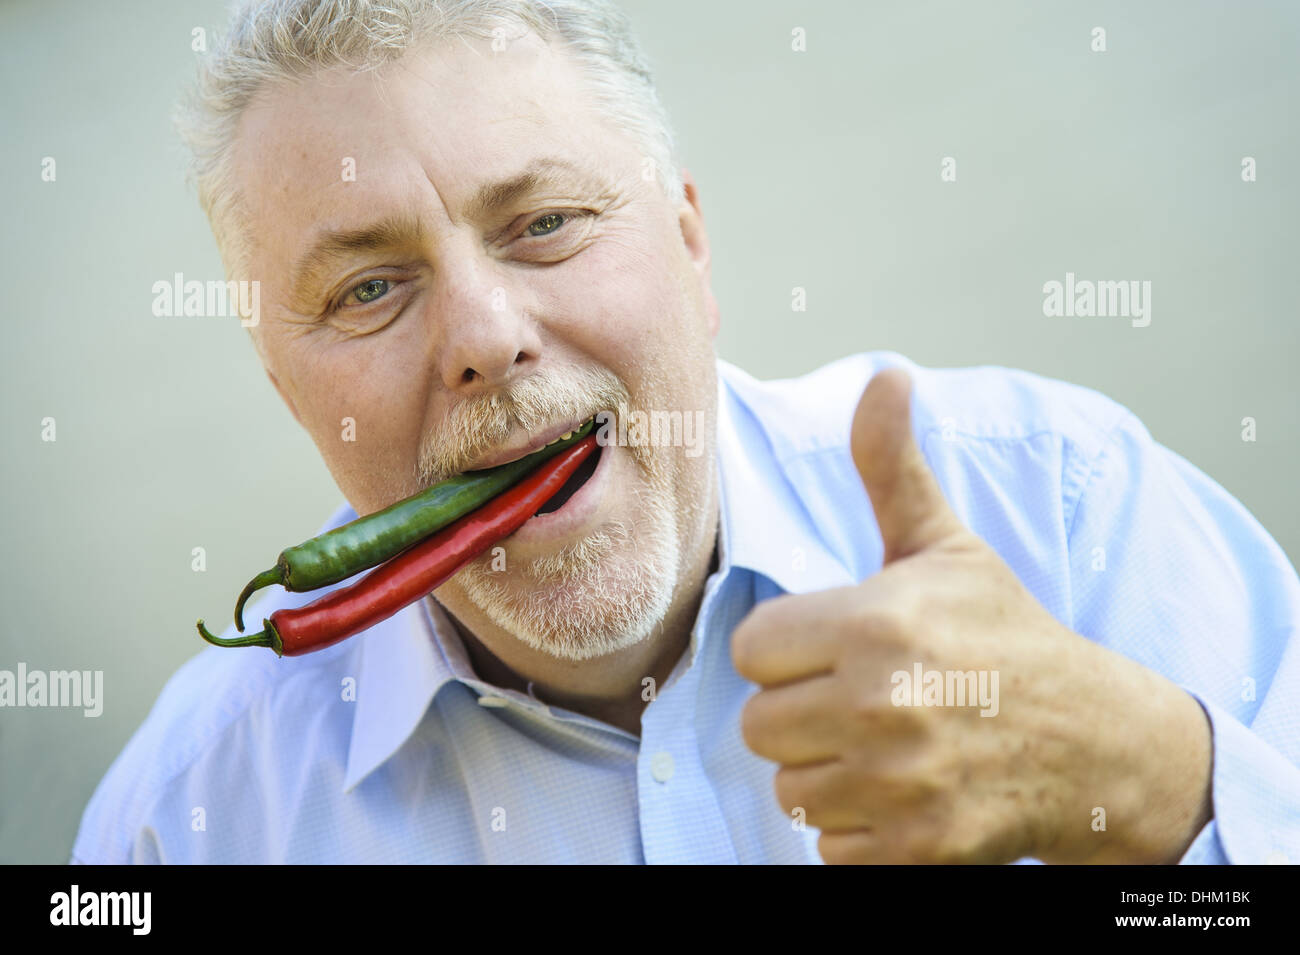 Senior with red and green chilli in mouth Stock Photo